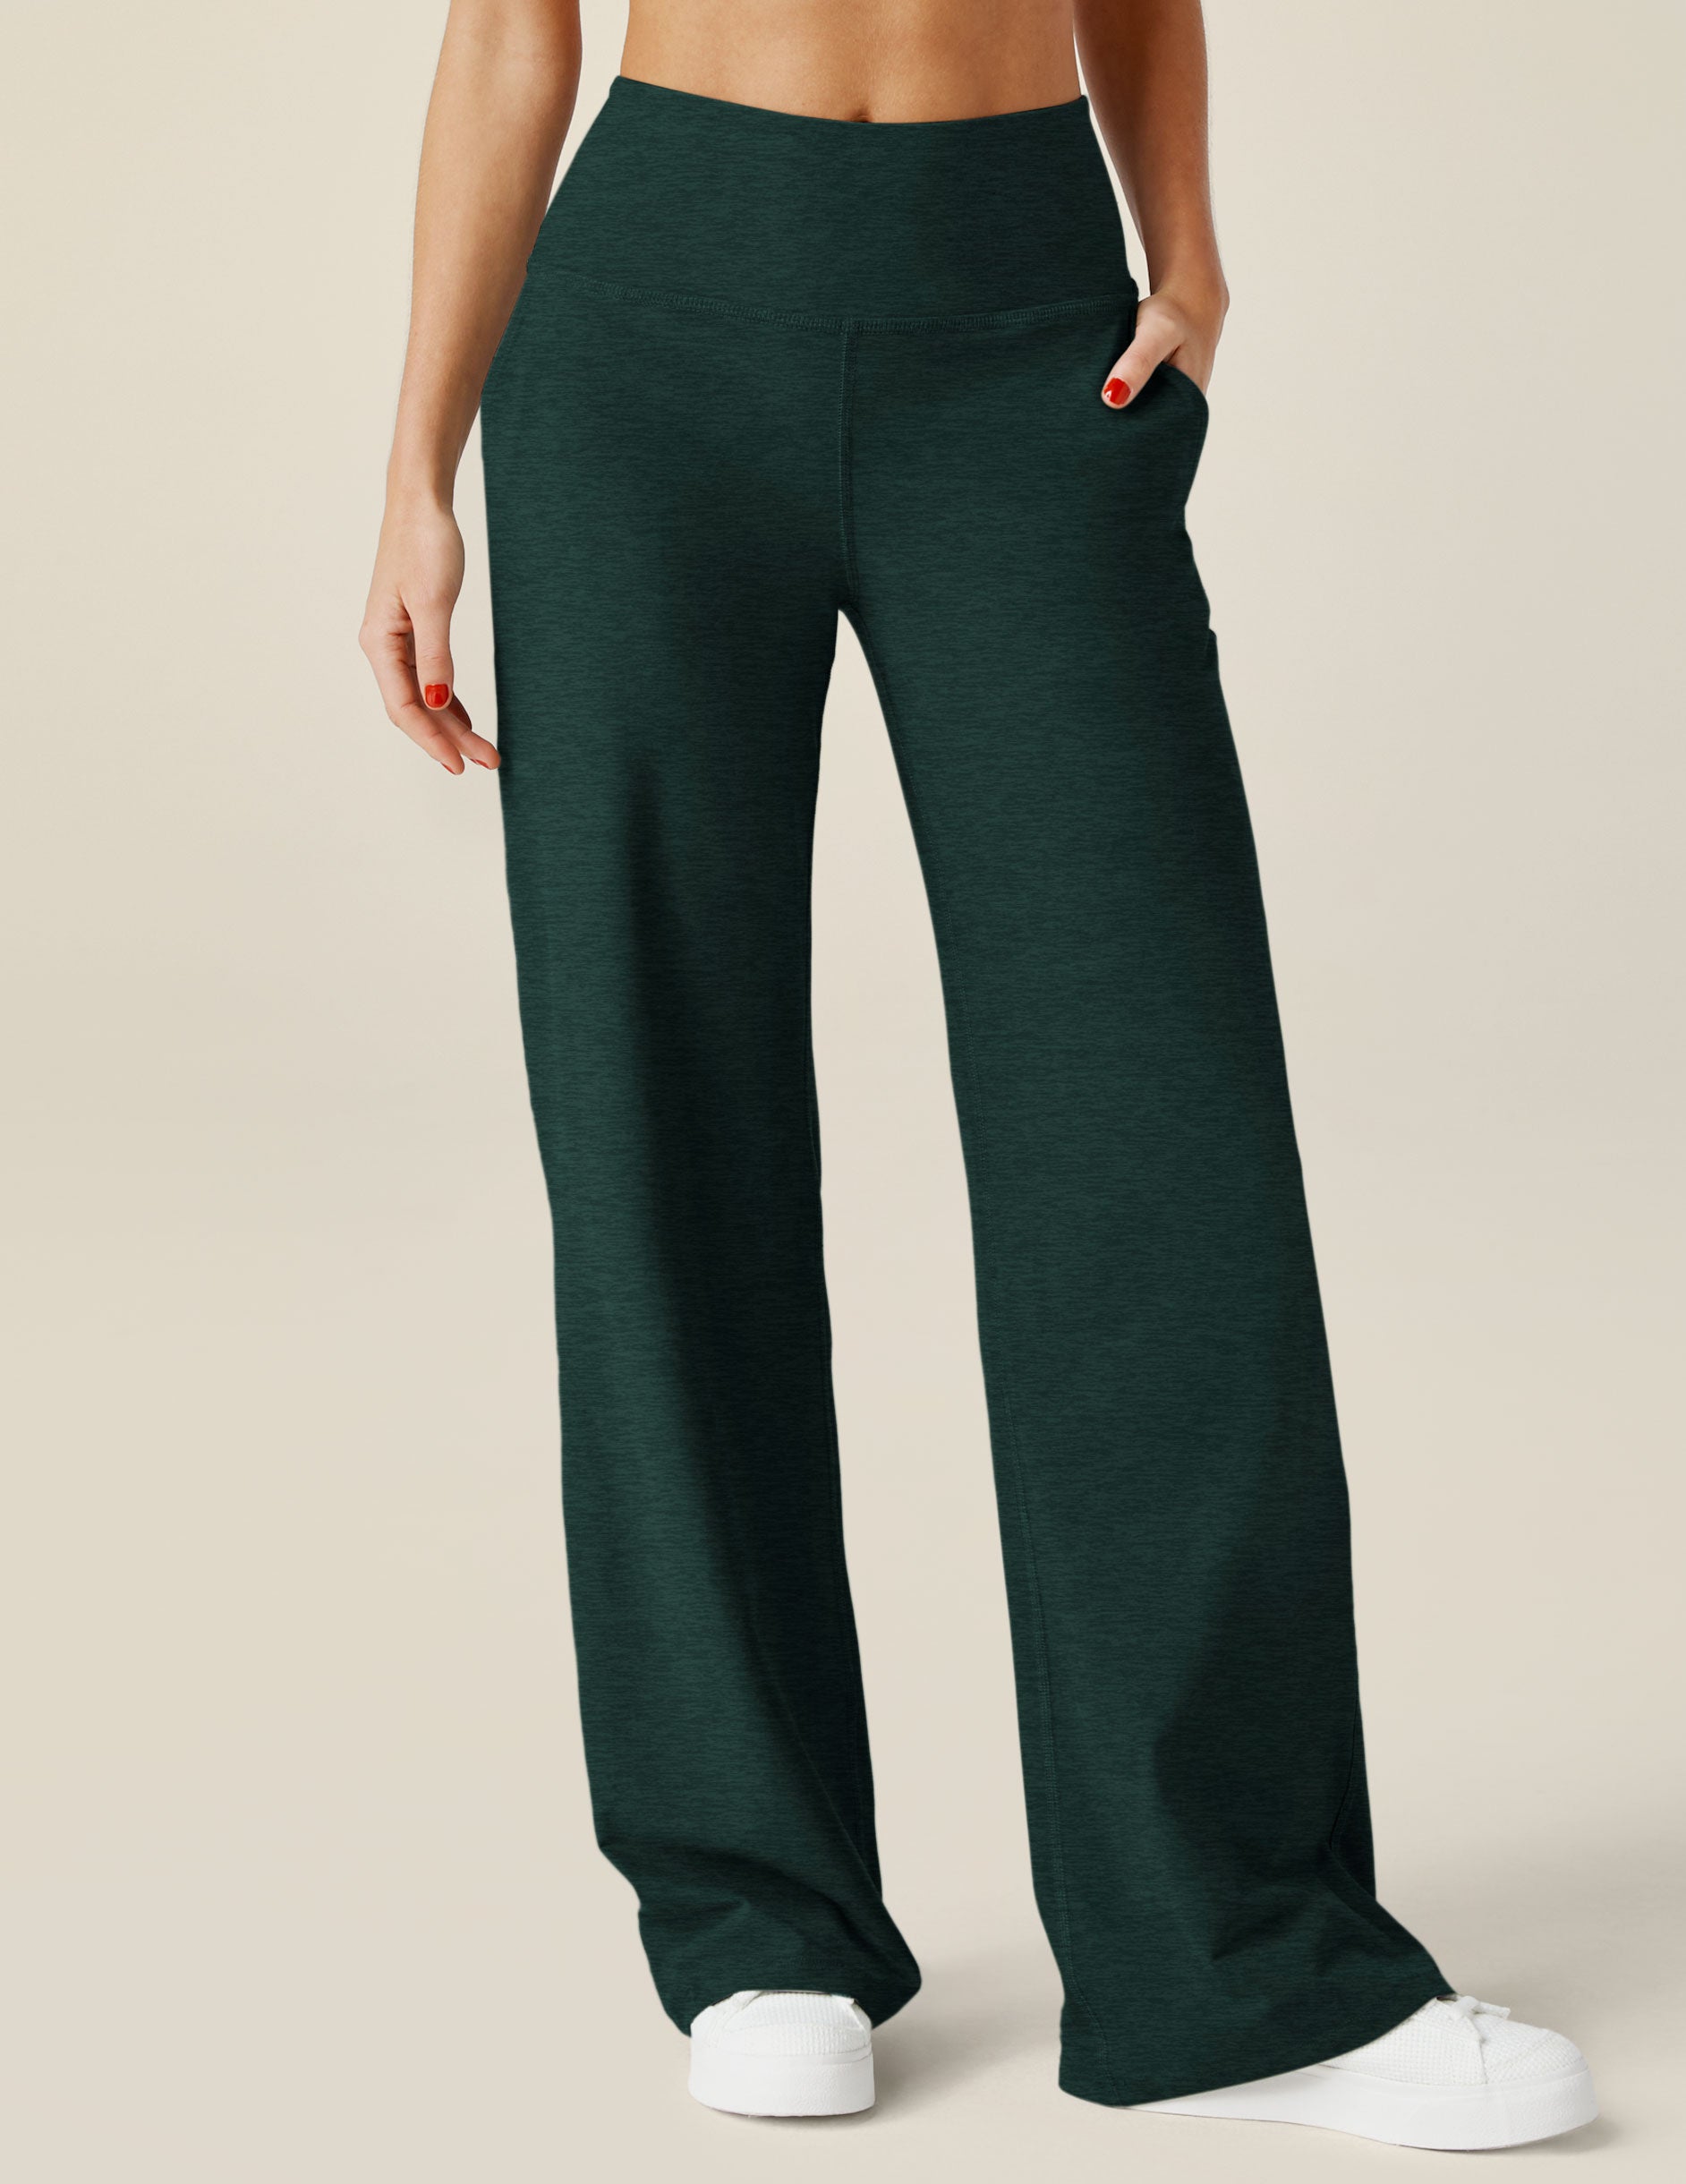 green high-waisted wide leg spacedye pants with pockets. 